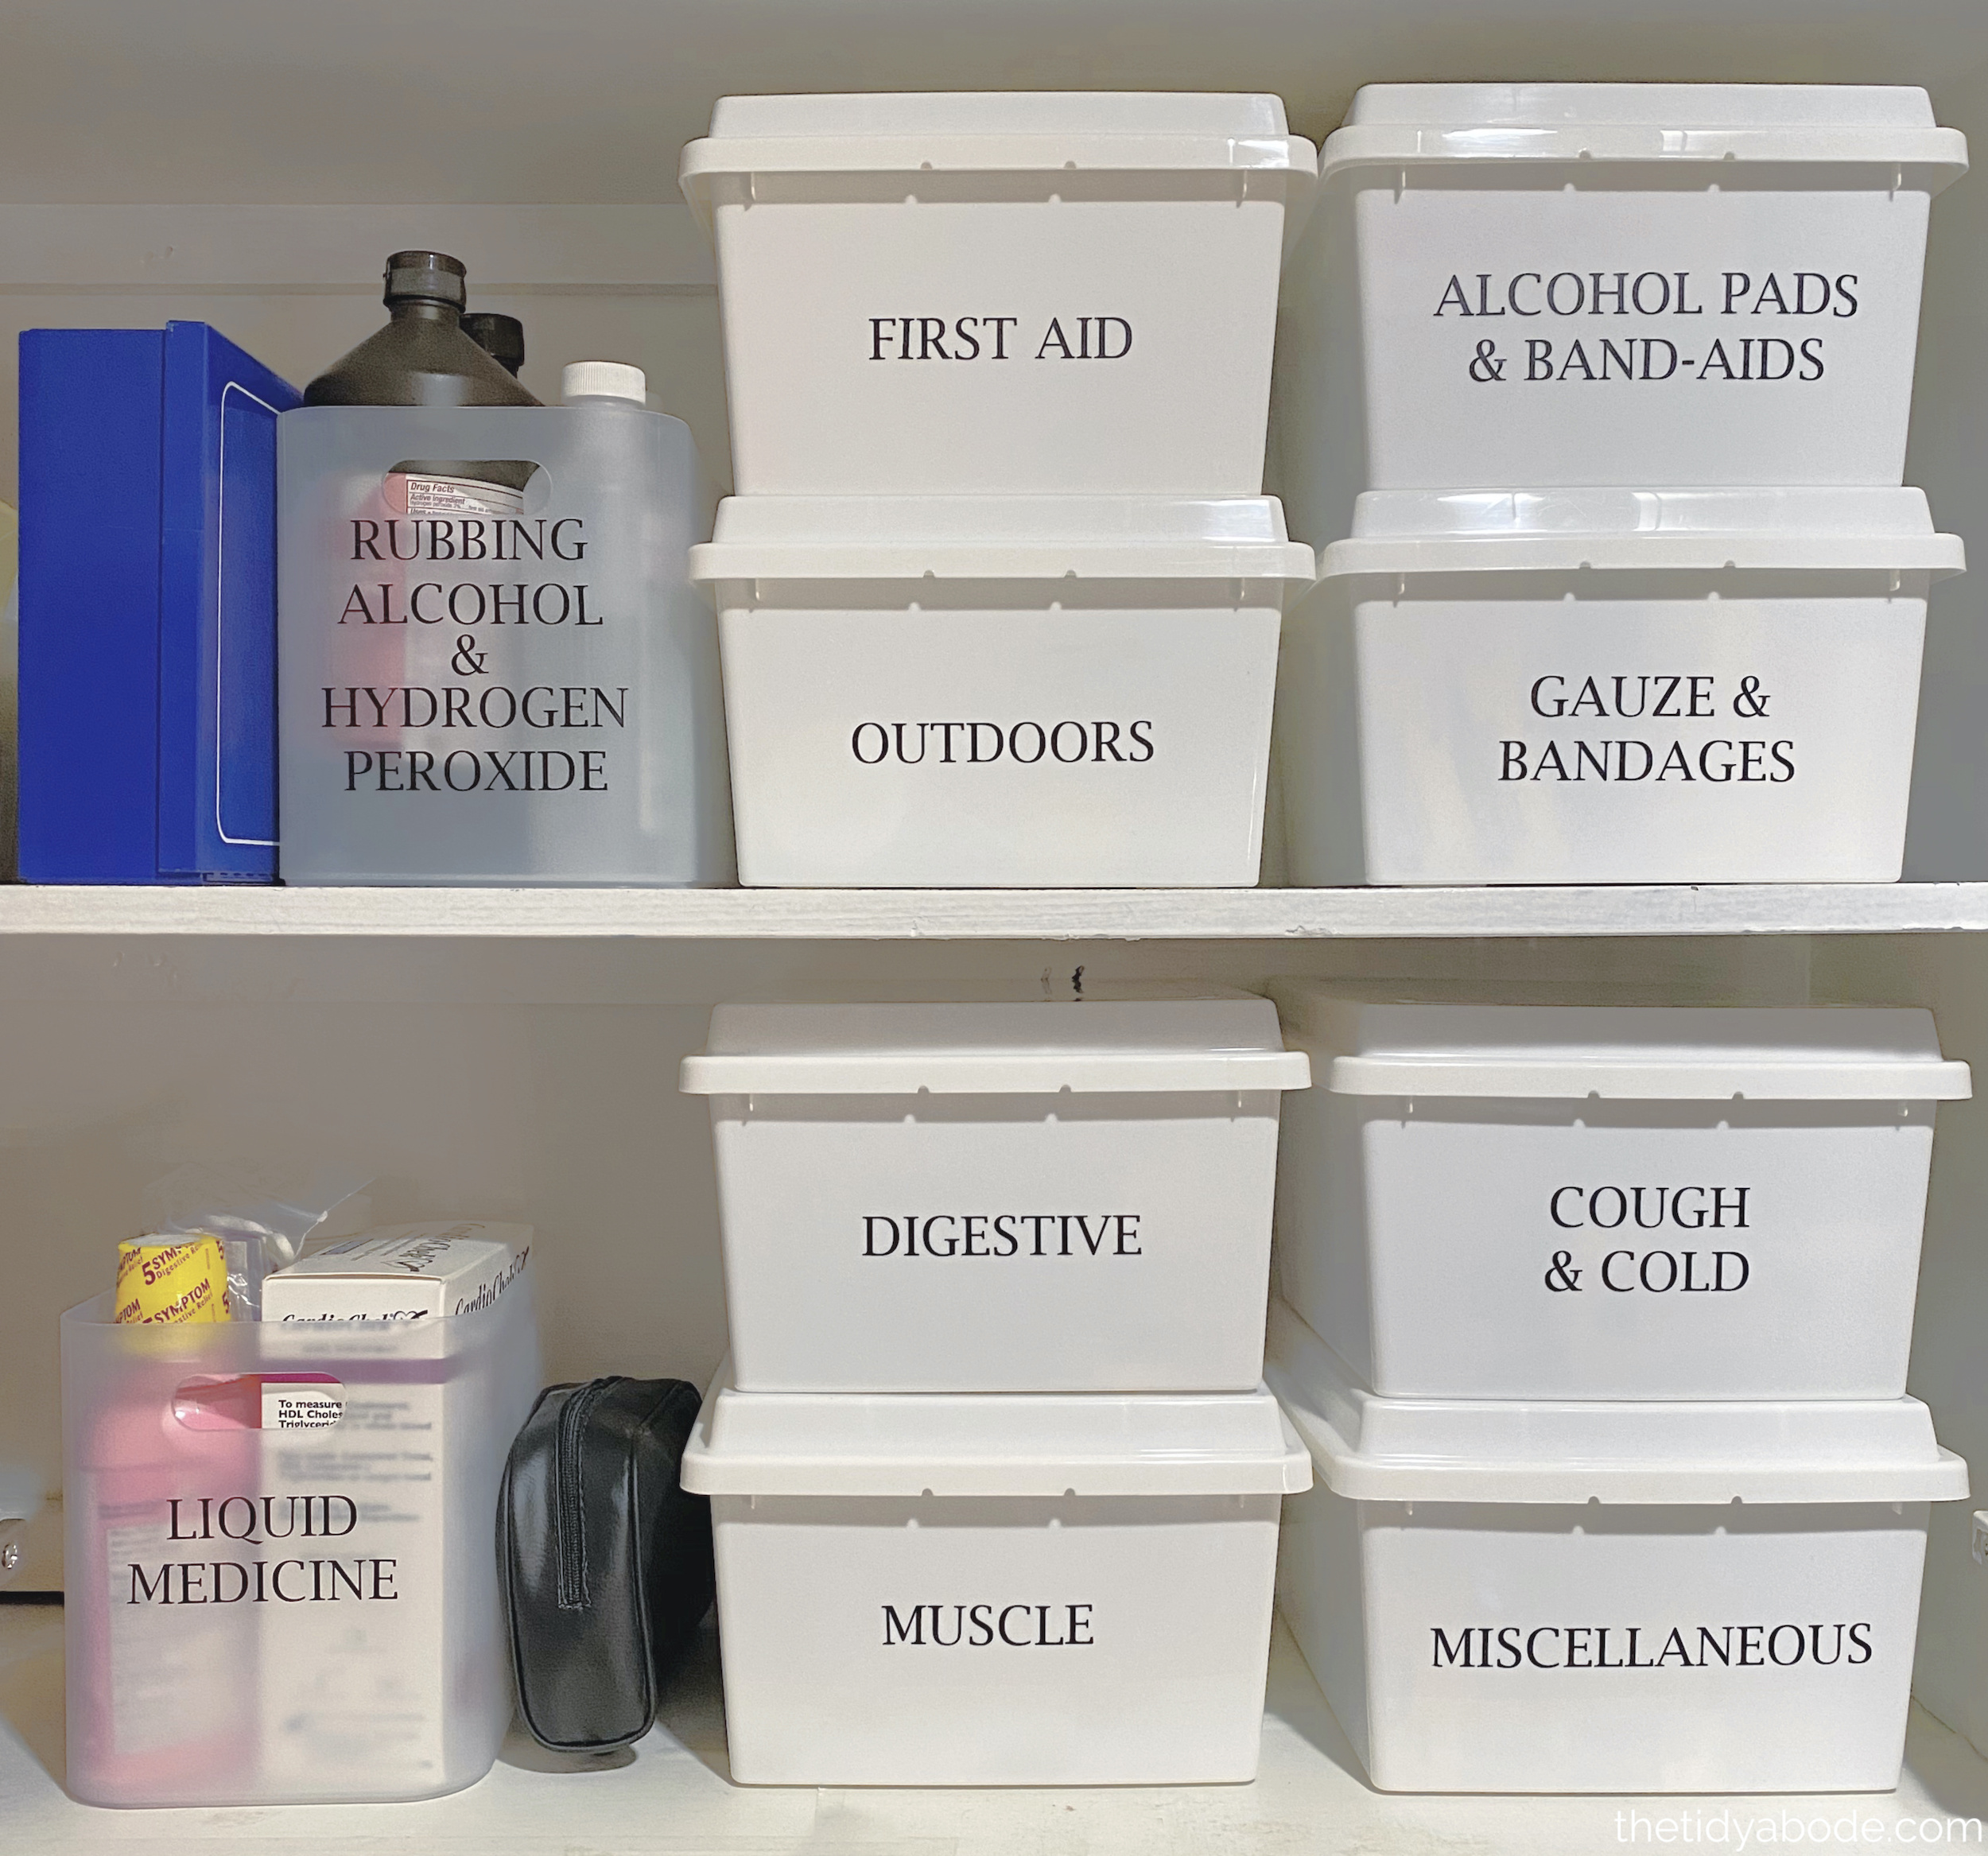 How to Organize Your Medicine Cabinet • The Tidy Abode